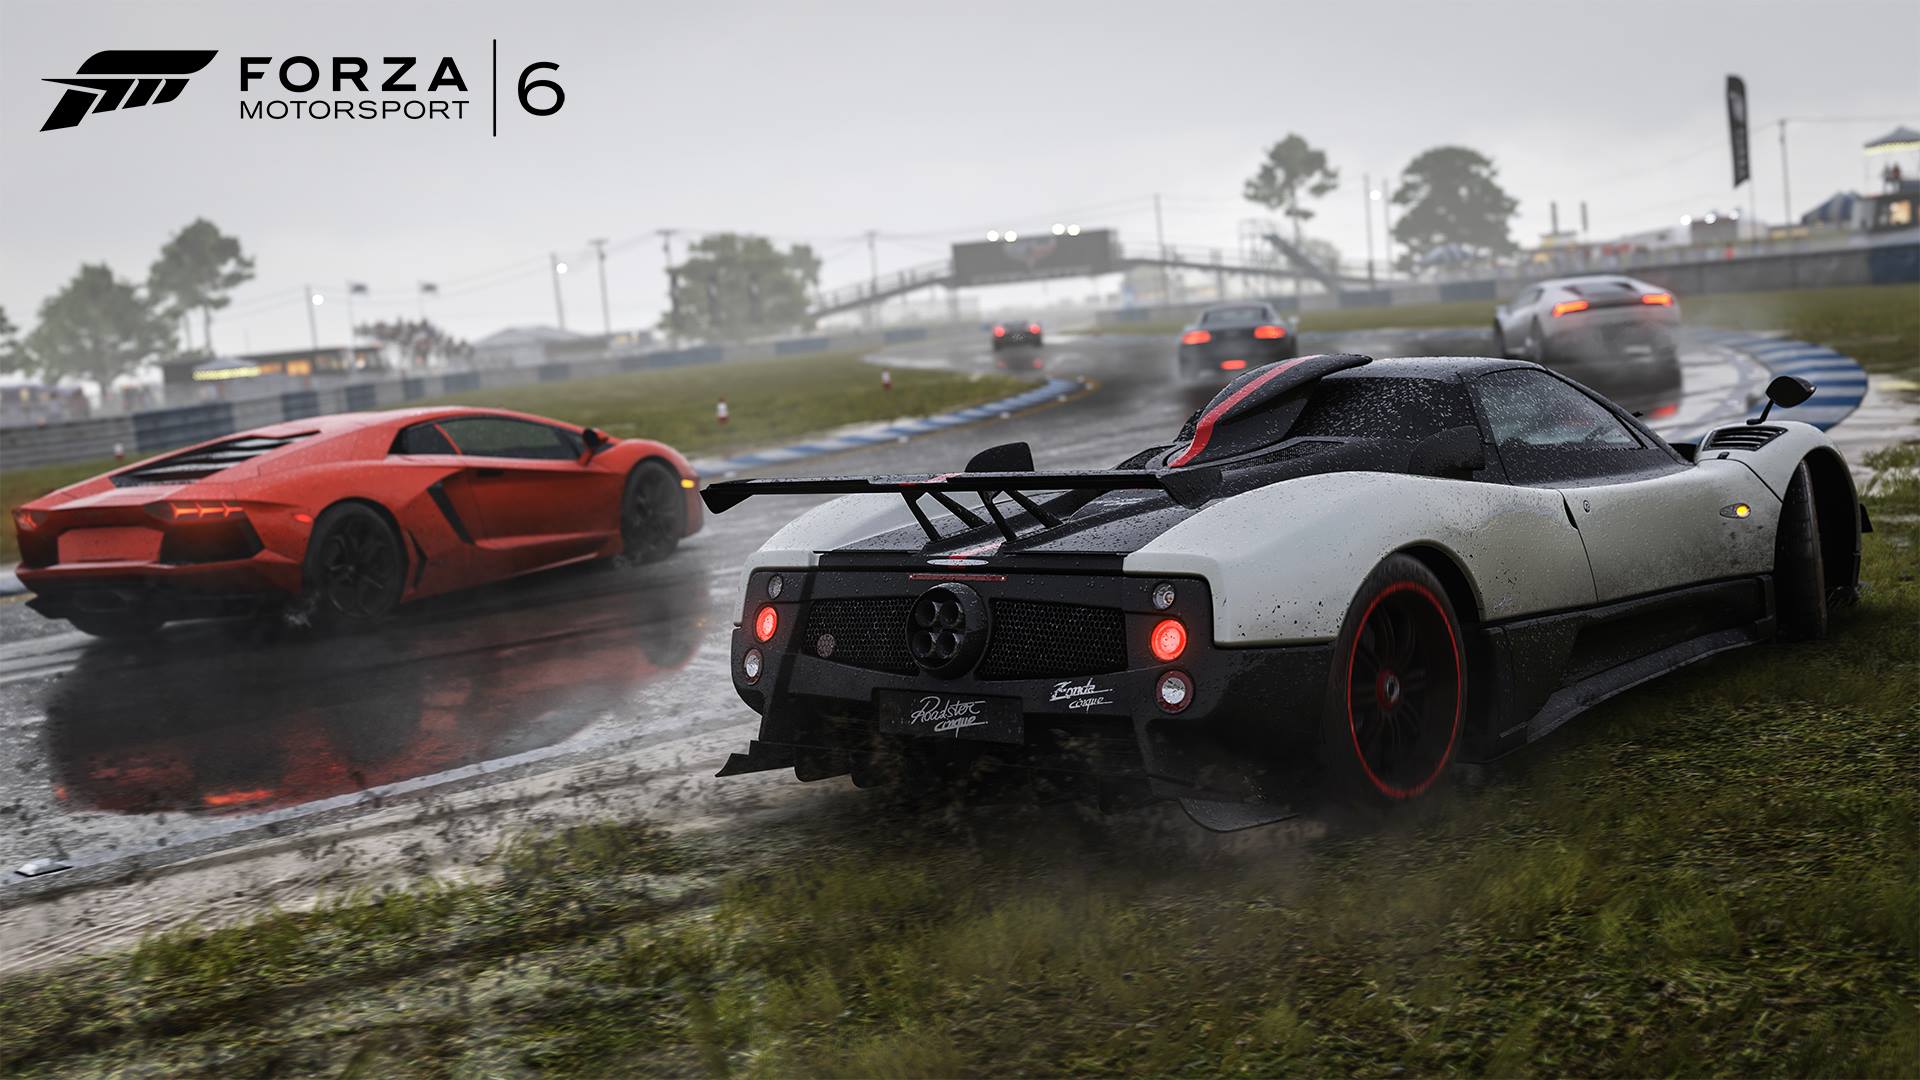 Forza Motorsport 6 review – a return to form for Microsoft's racing series, Games